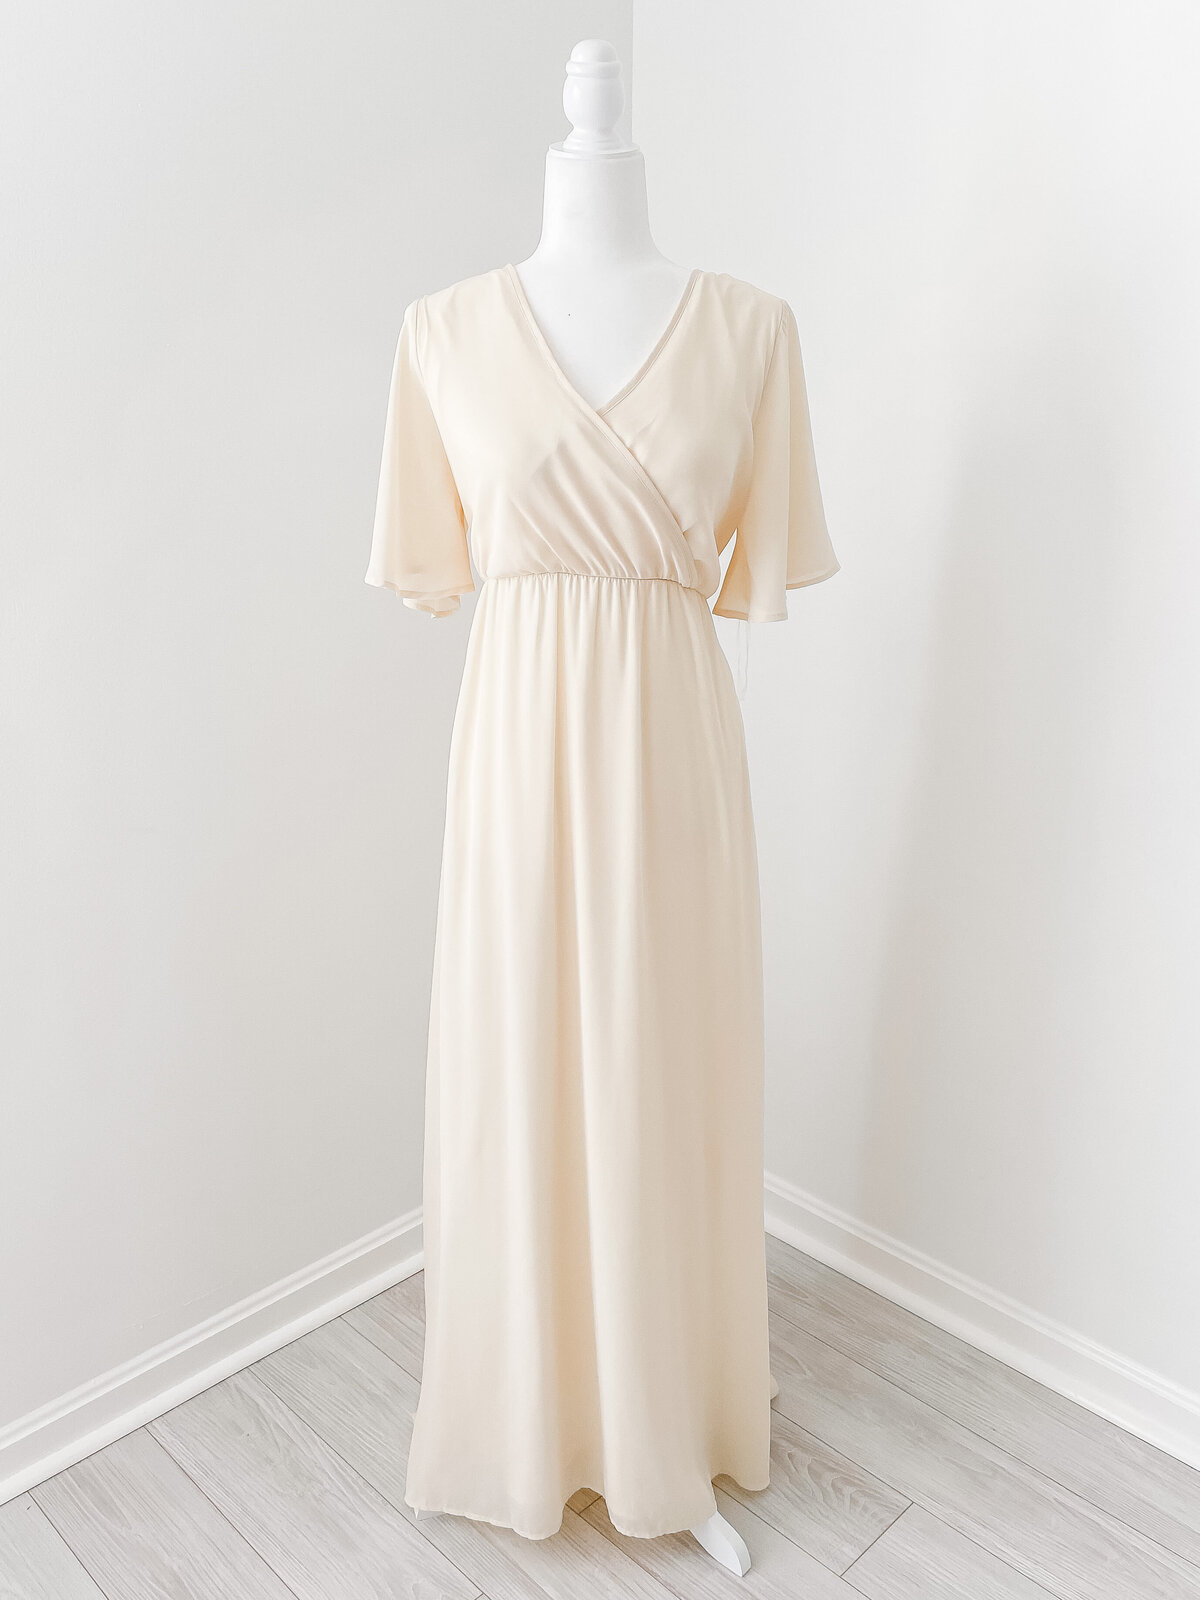 A maxi pale yellow and cream dress  with short sleeves for a DC Newborn Photography photo session